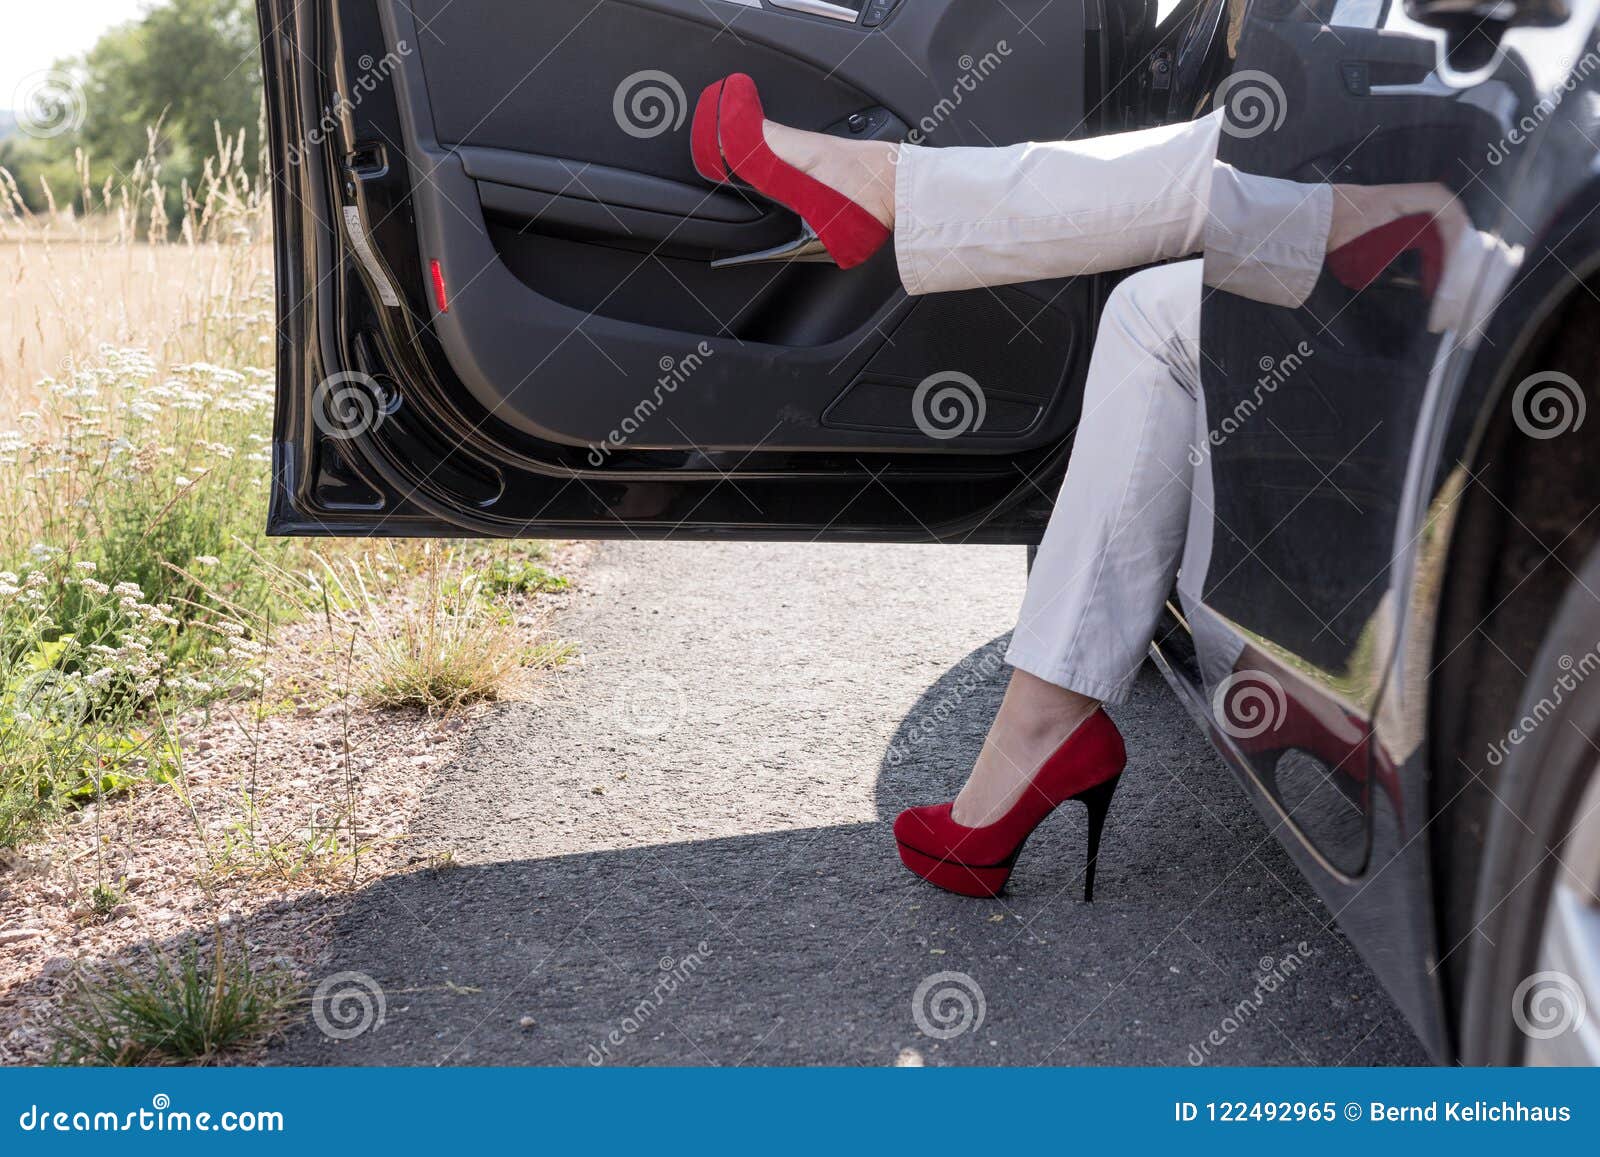 Woman Gets Out of the Car. Legs with Red High Heeled Shoes Stock Image ...